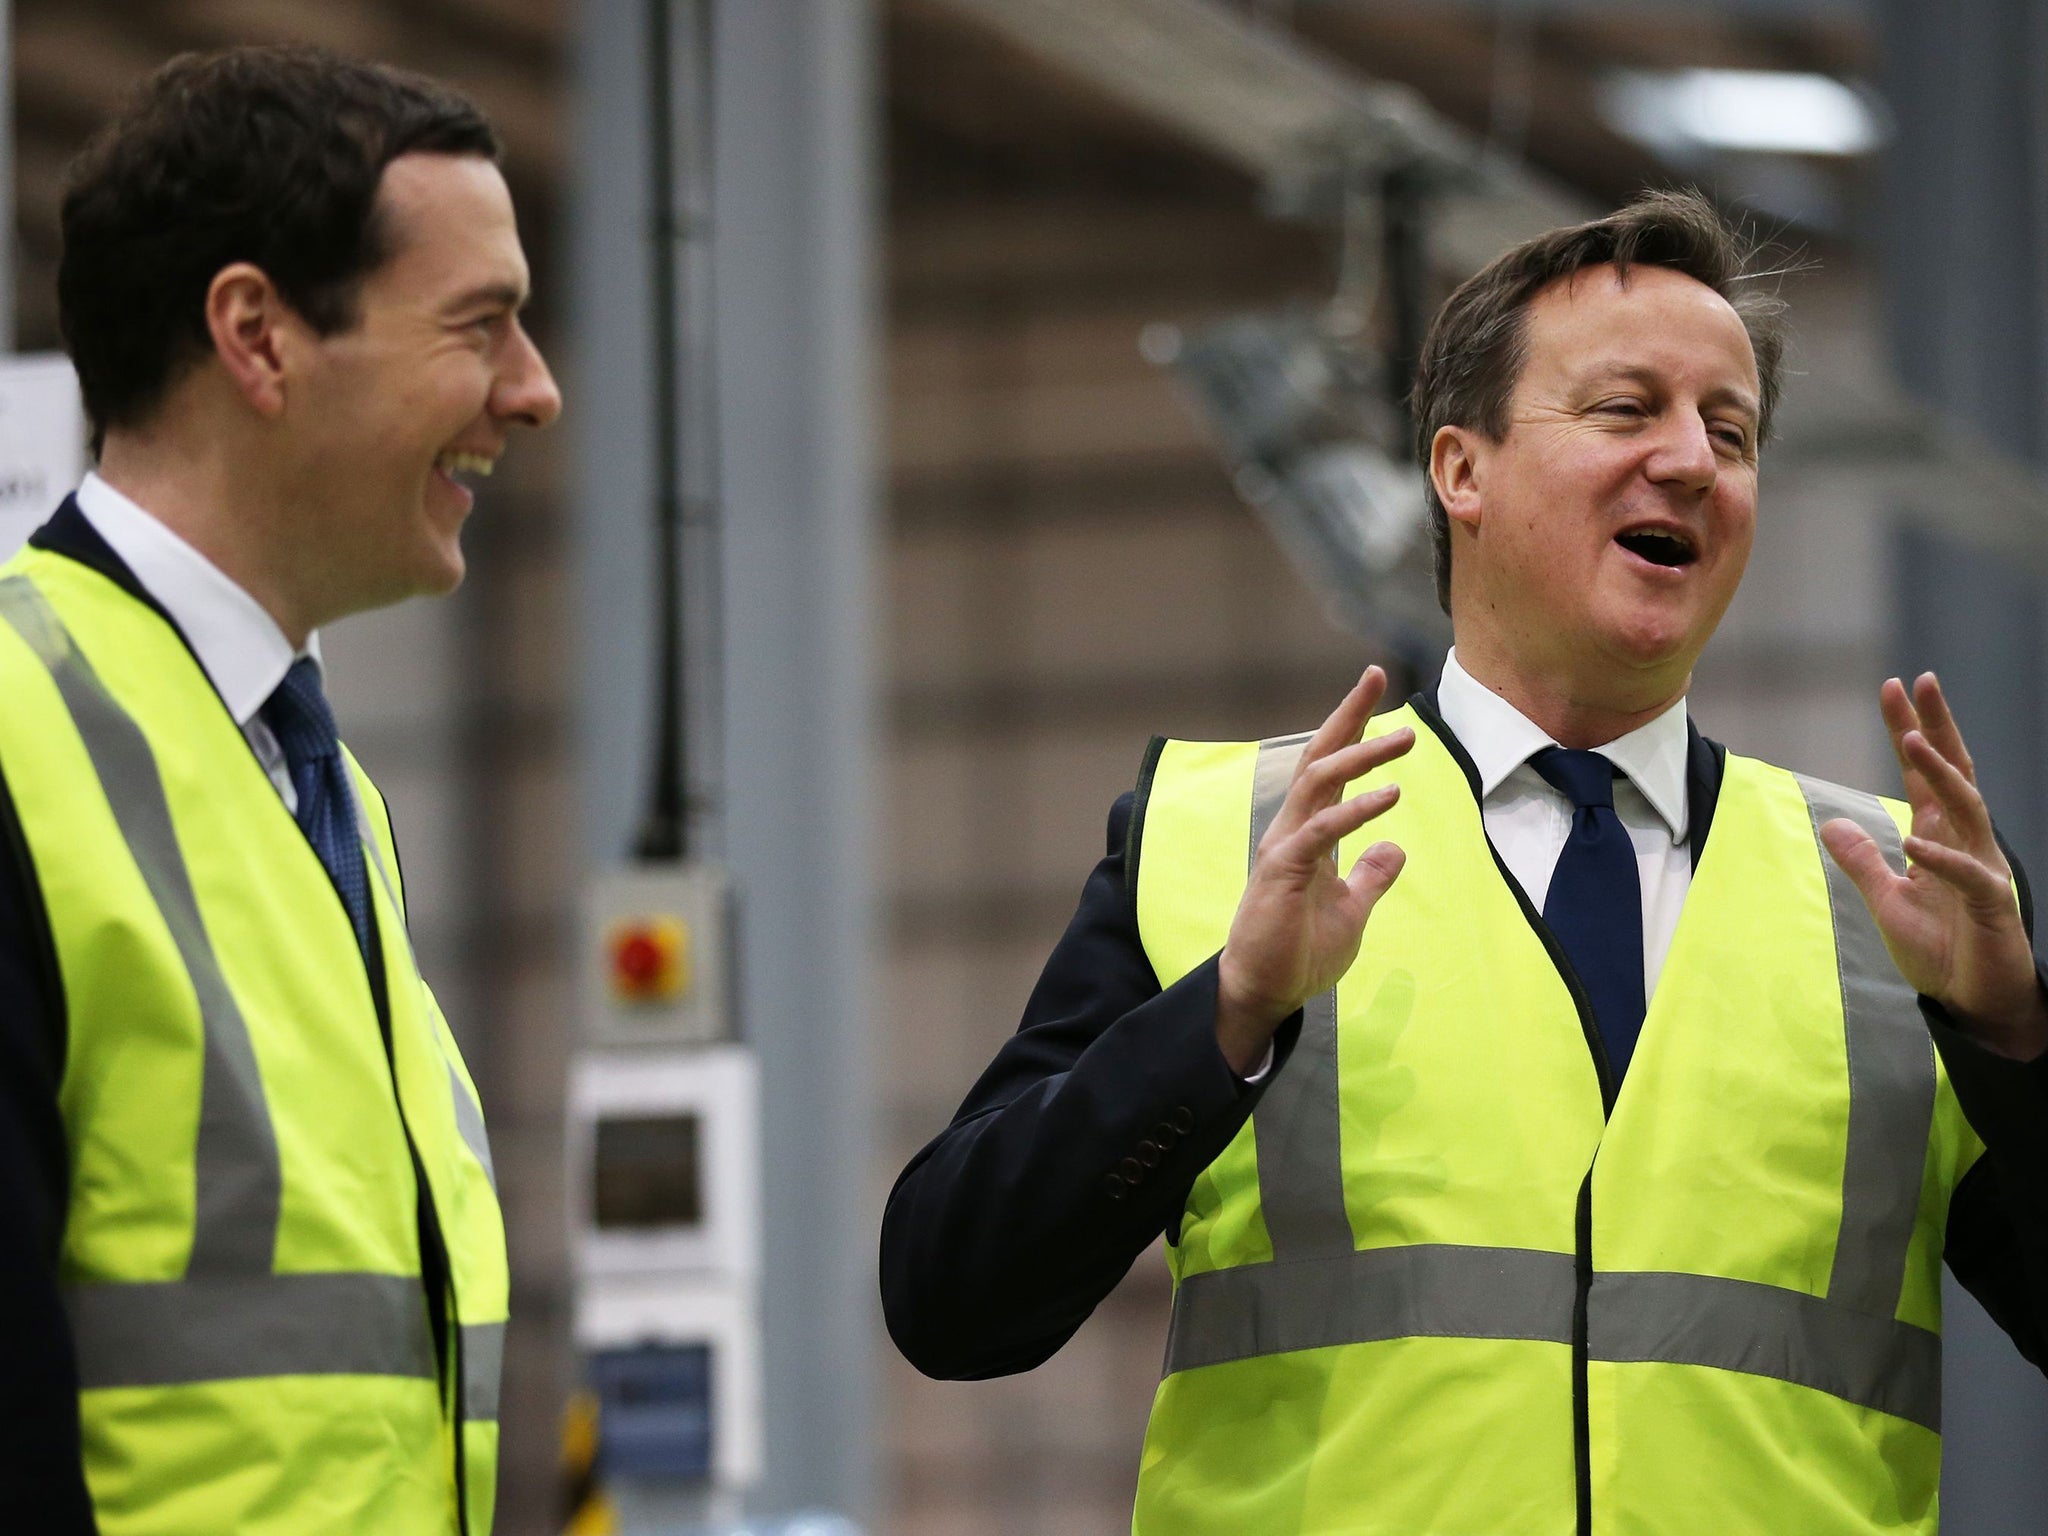 George Osborne (left) and David Cameron visiting Warrington; his office says he is too busy for the debate